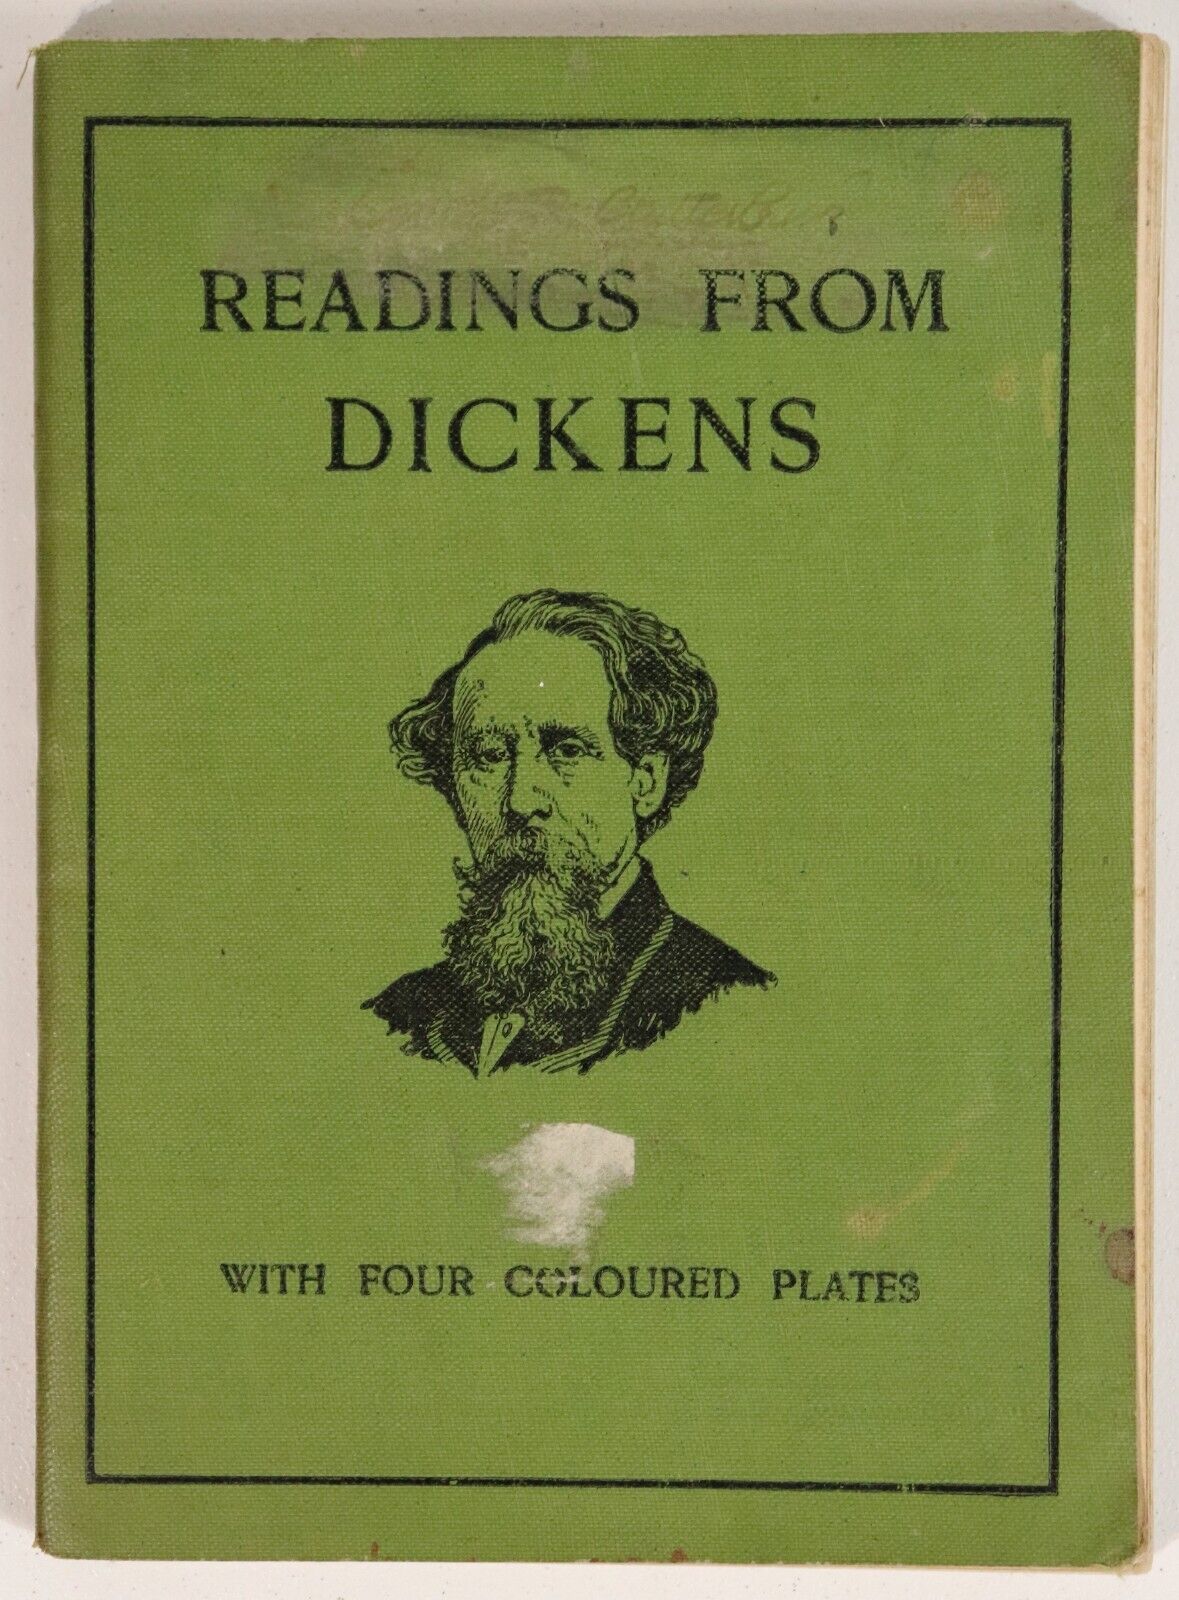 Readings From Dickens by Charles Dickens - c1910 - Antique Literature Book